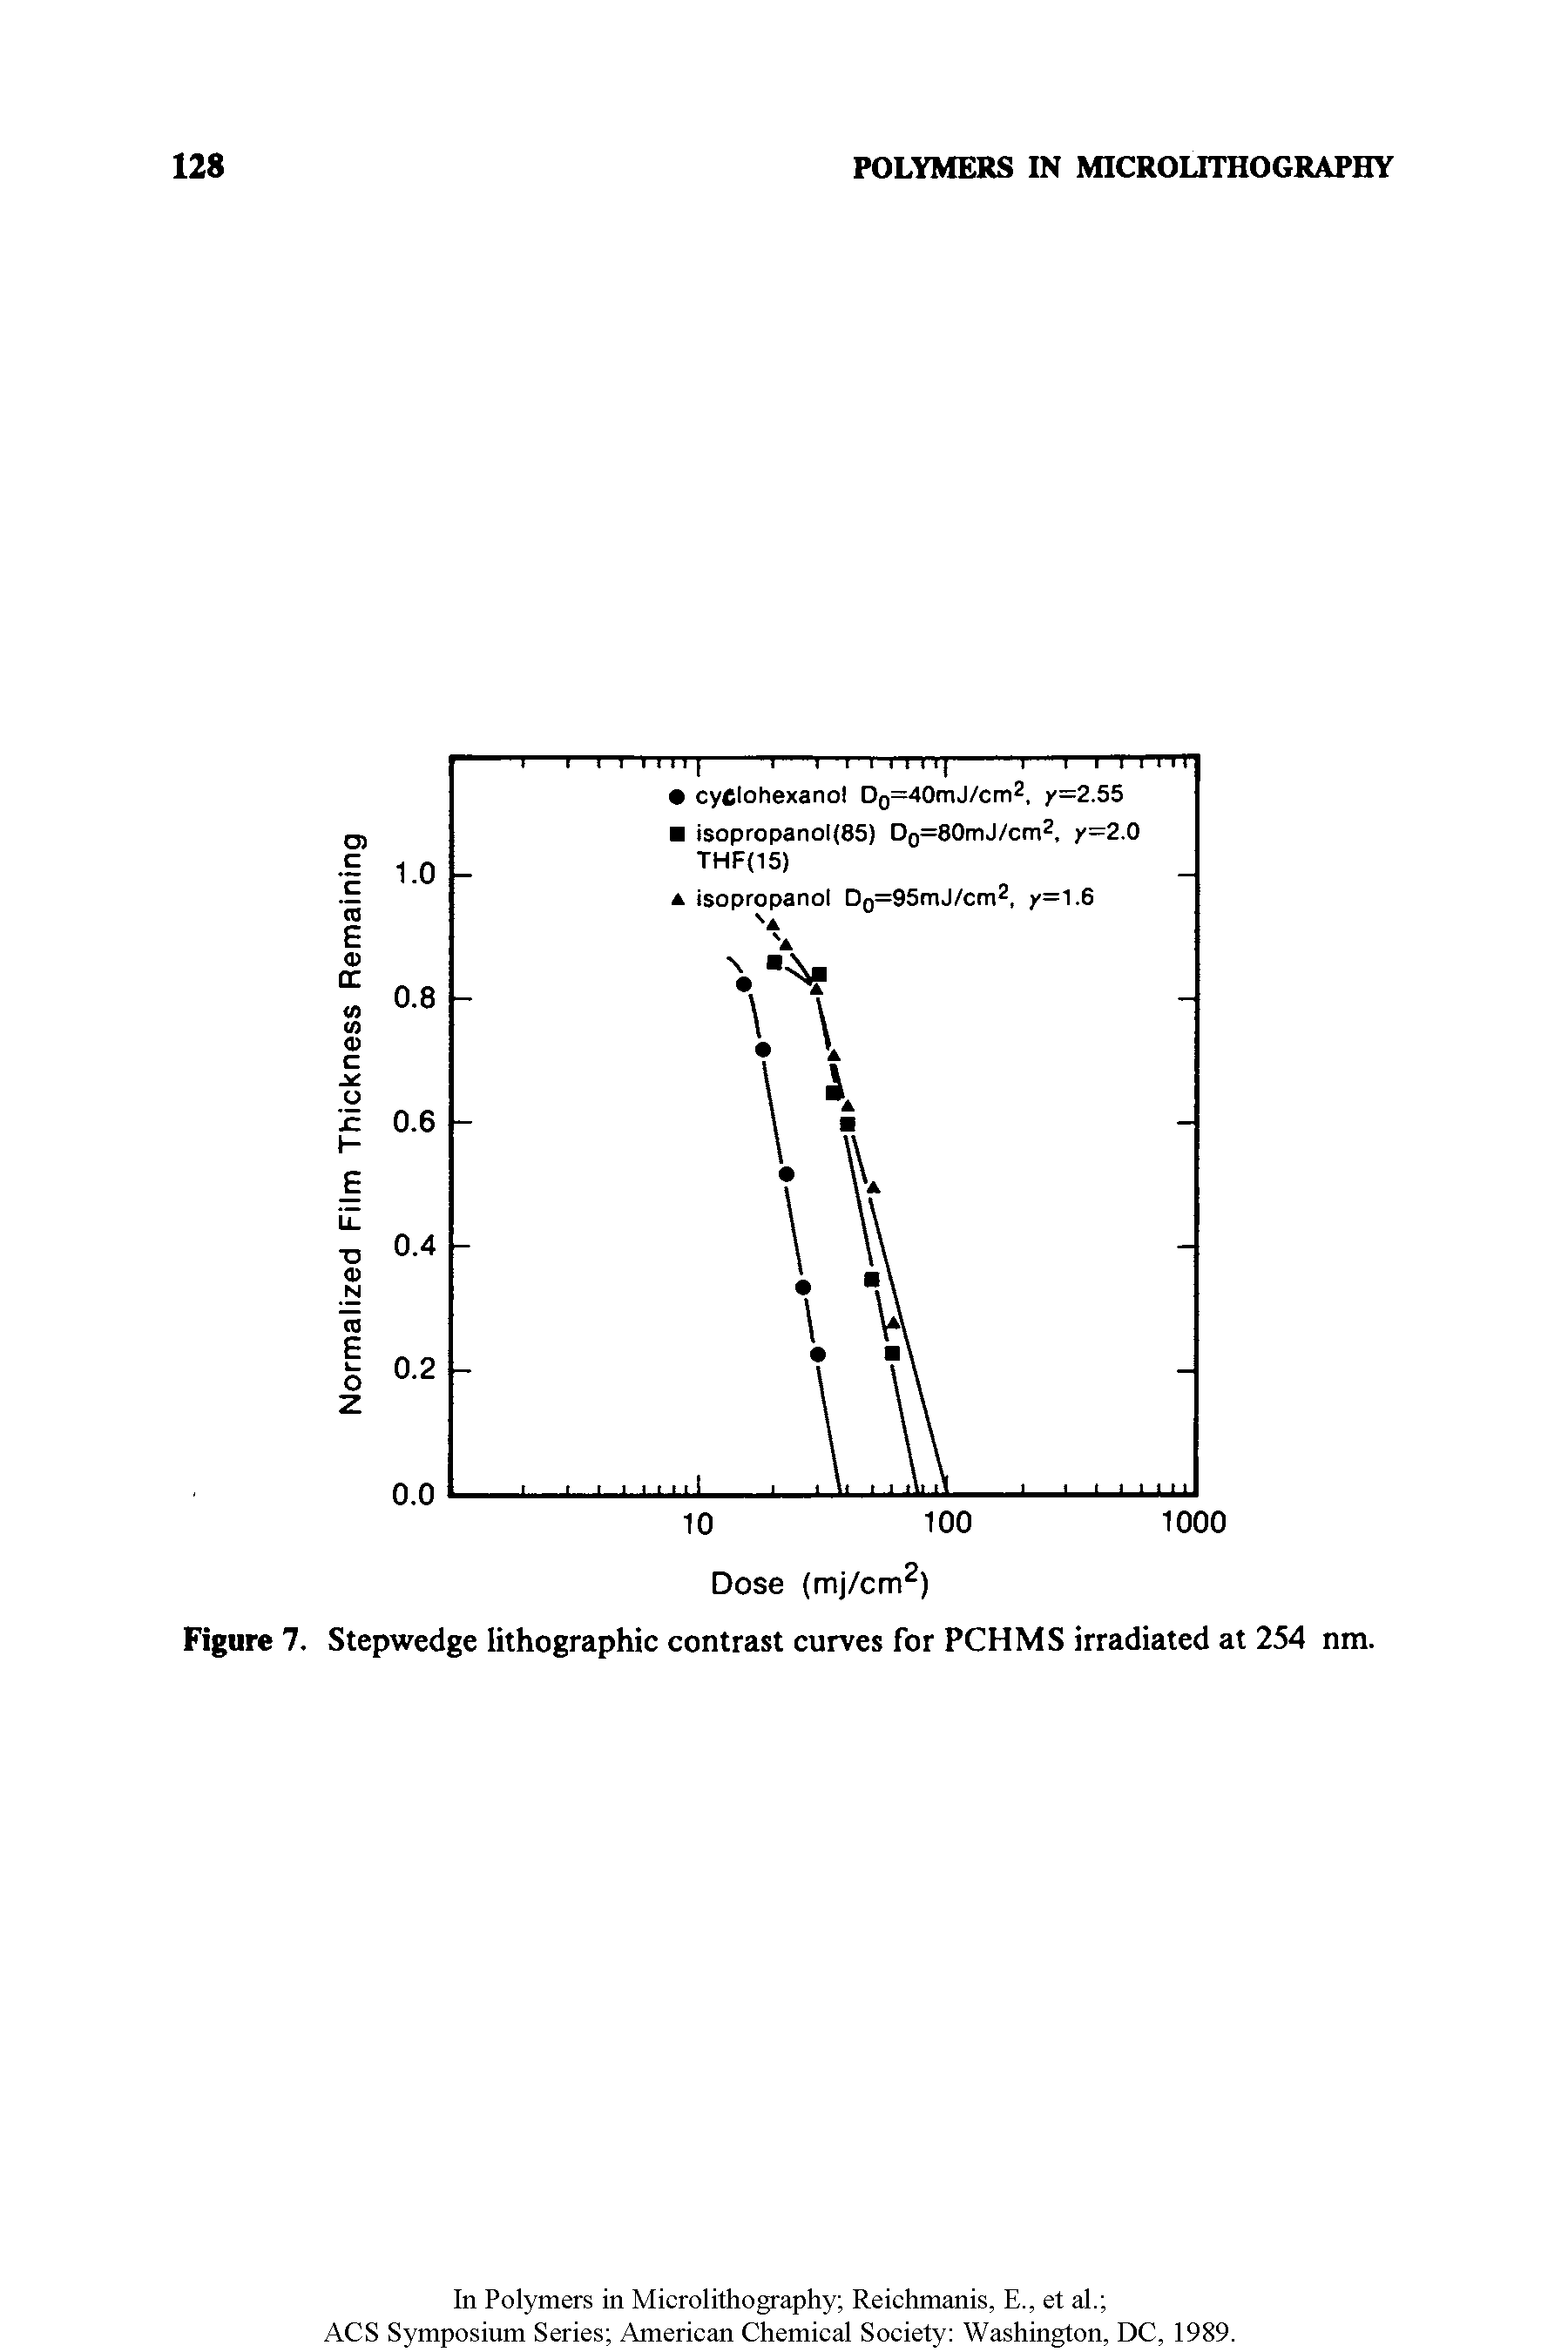 Figure 7. Stepwedge lithographic contrast curves for PCHMS irradiated at 254 nm.